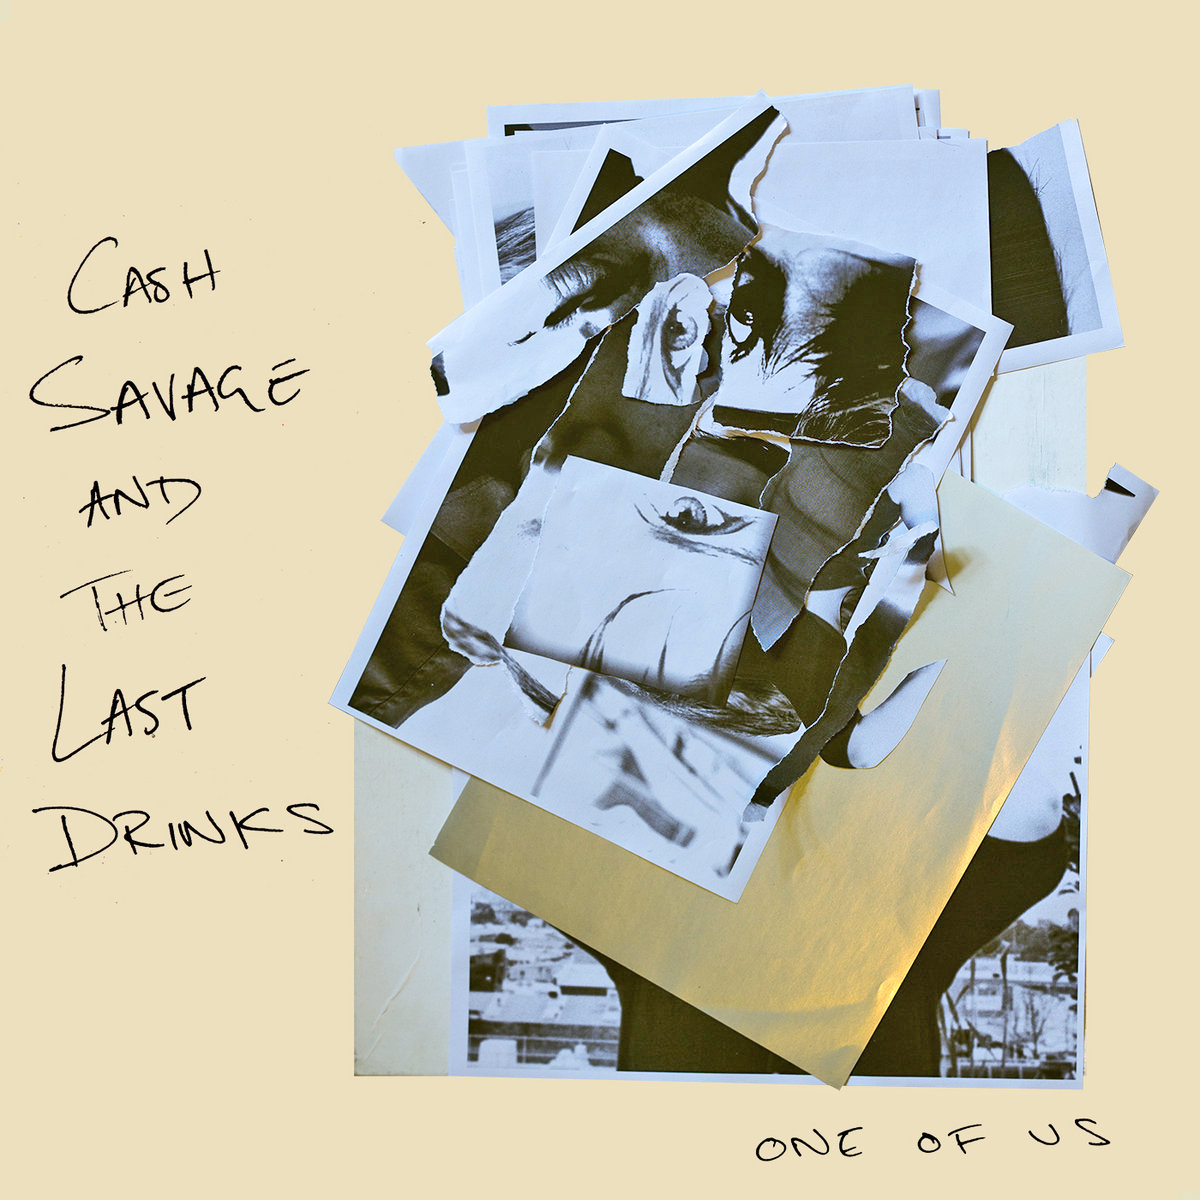 Cash Savage And The Last Drinks- One Of Us LP ~BEAST RECORDS!